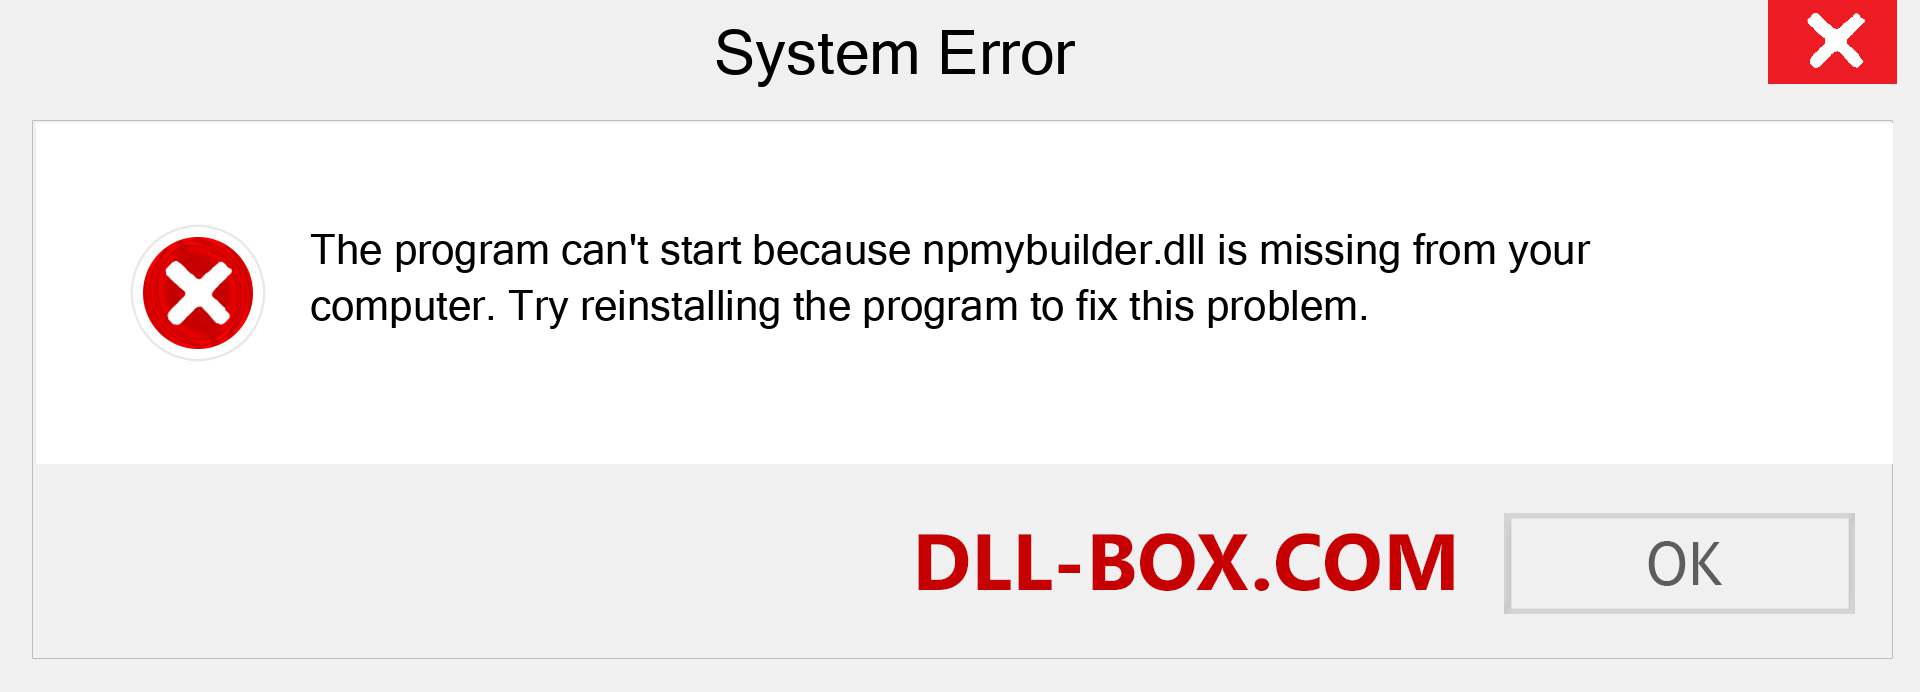  npmybuilder.dll file is missing?. Download for Windows 7, 8, 10 - Fix  npmybuilder dll Missing Error on Windows, photos, images